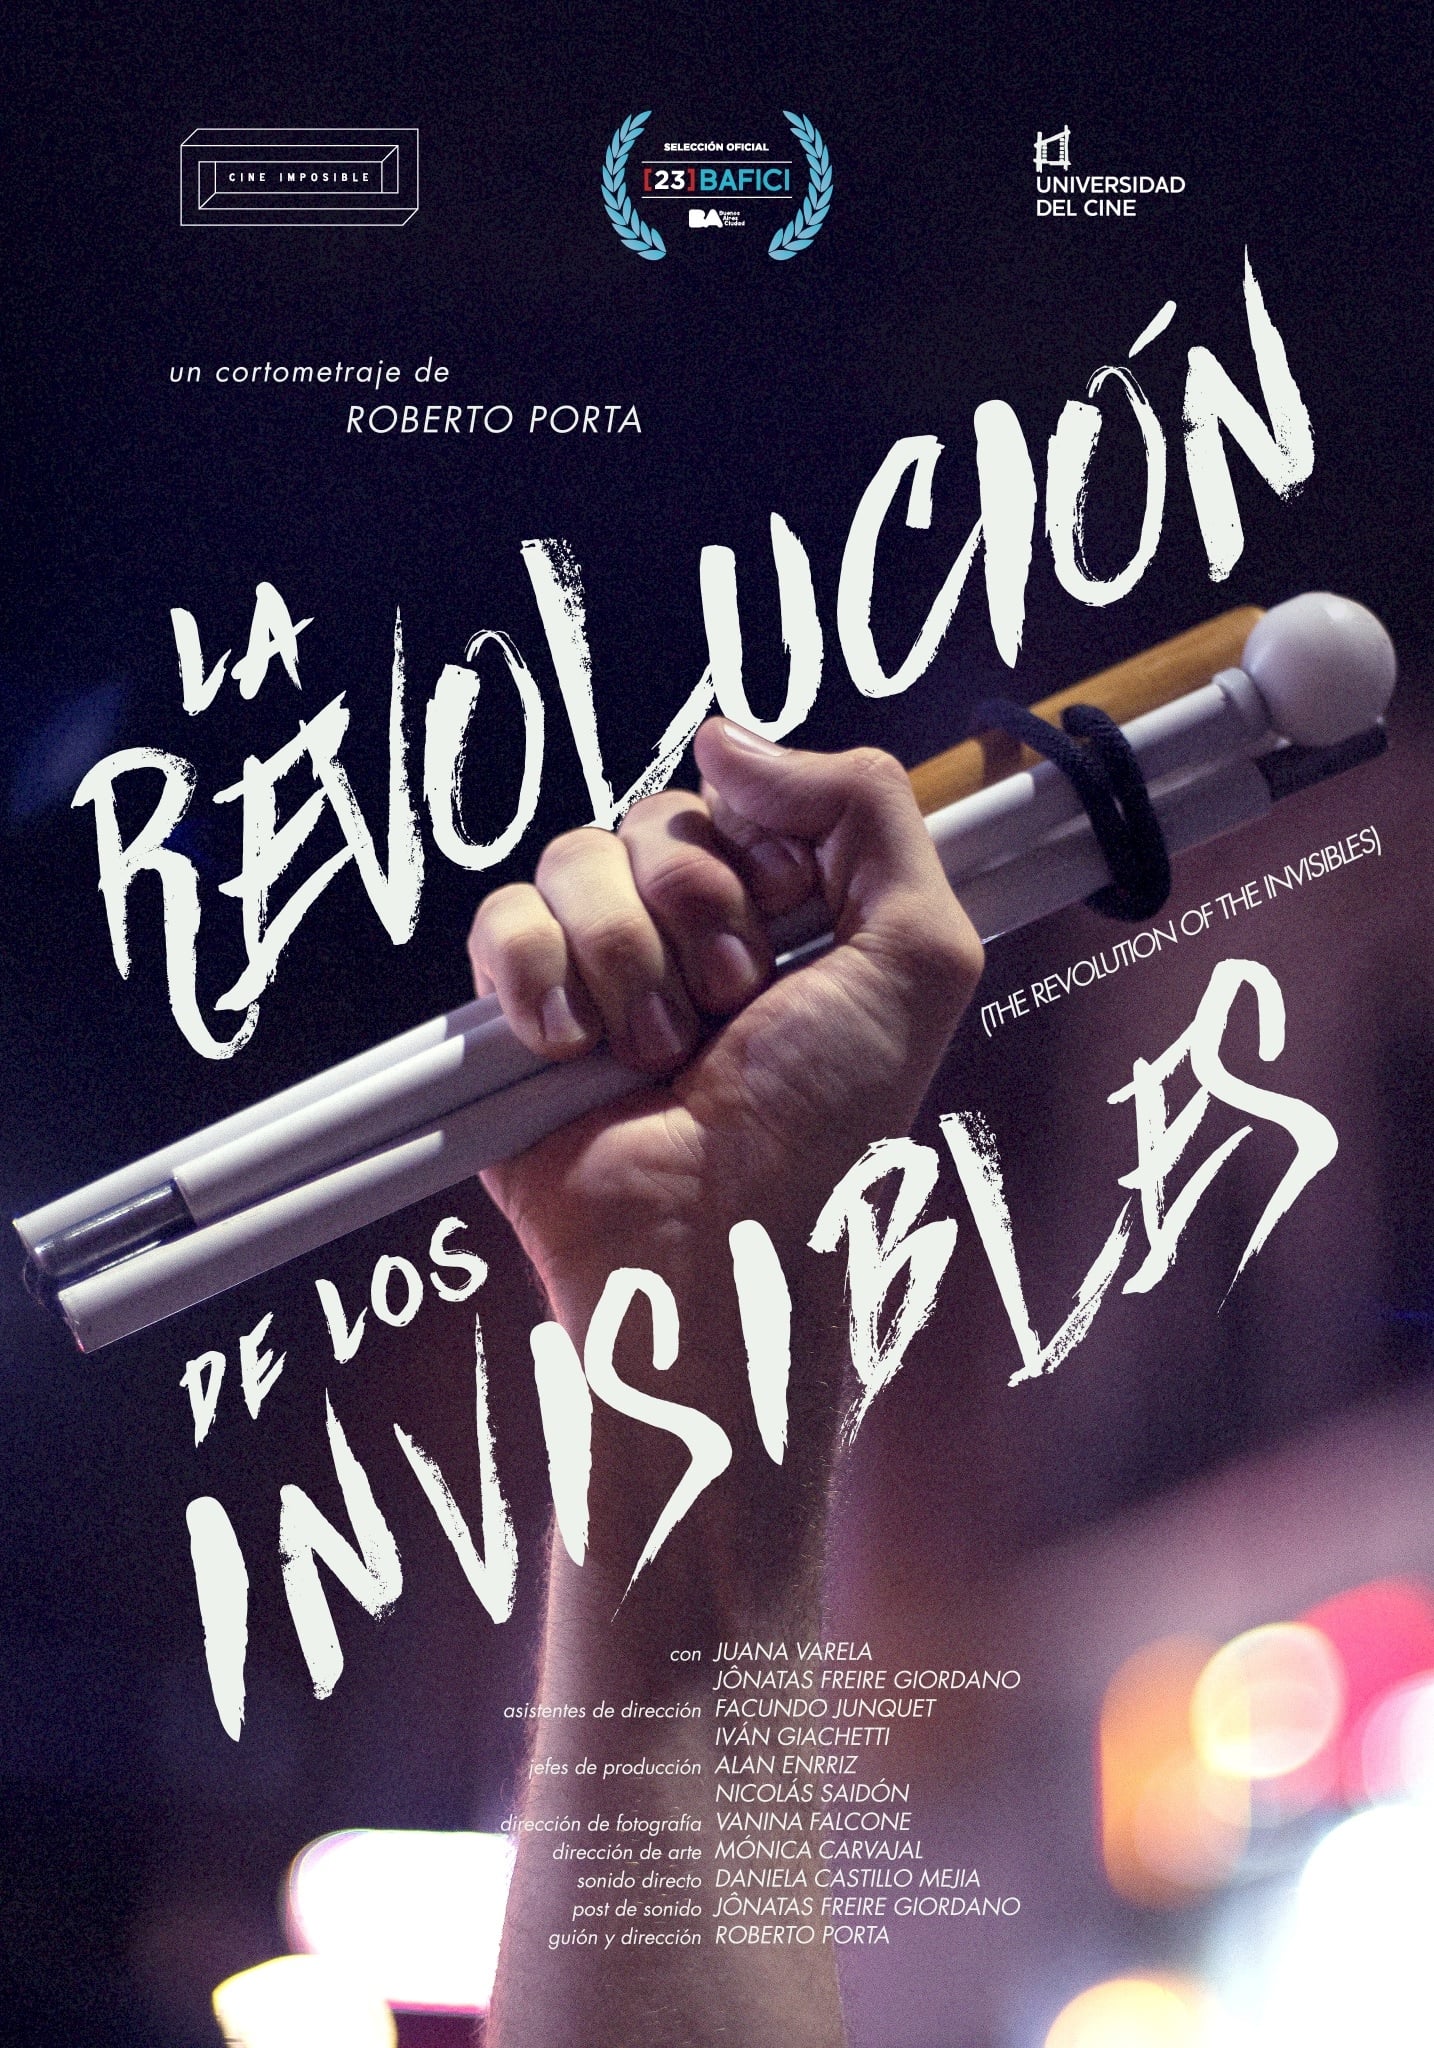 The Revolution of the Invisibles